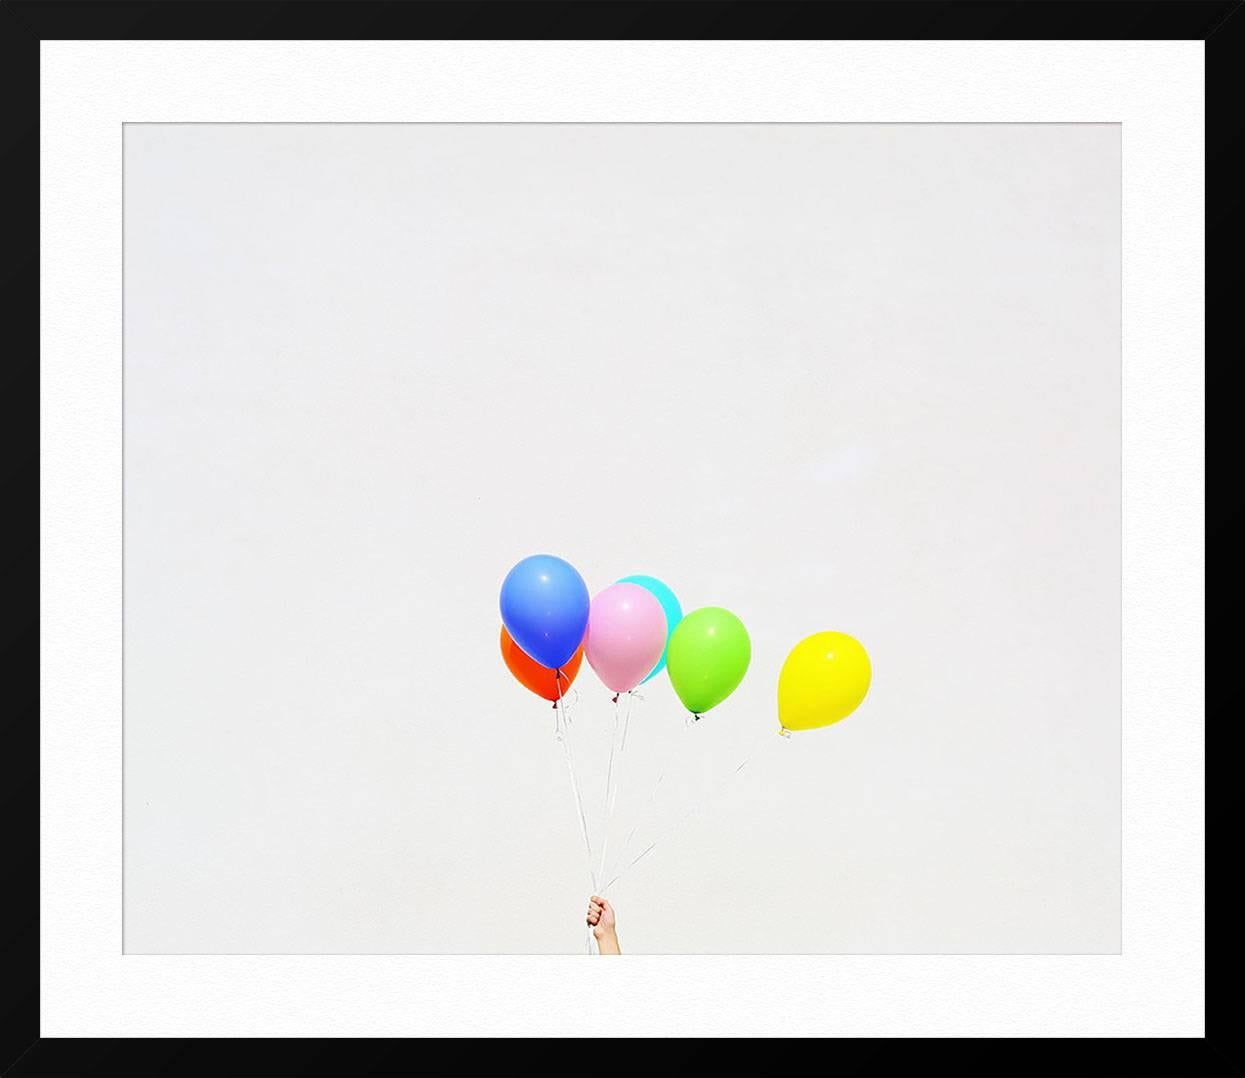 ABOUT THIS PIECE: Untitled (Balloons) is from Kimberly's 